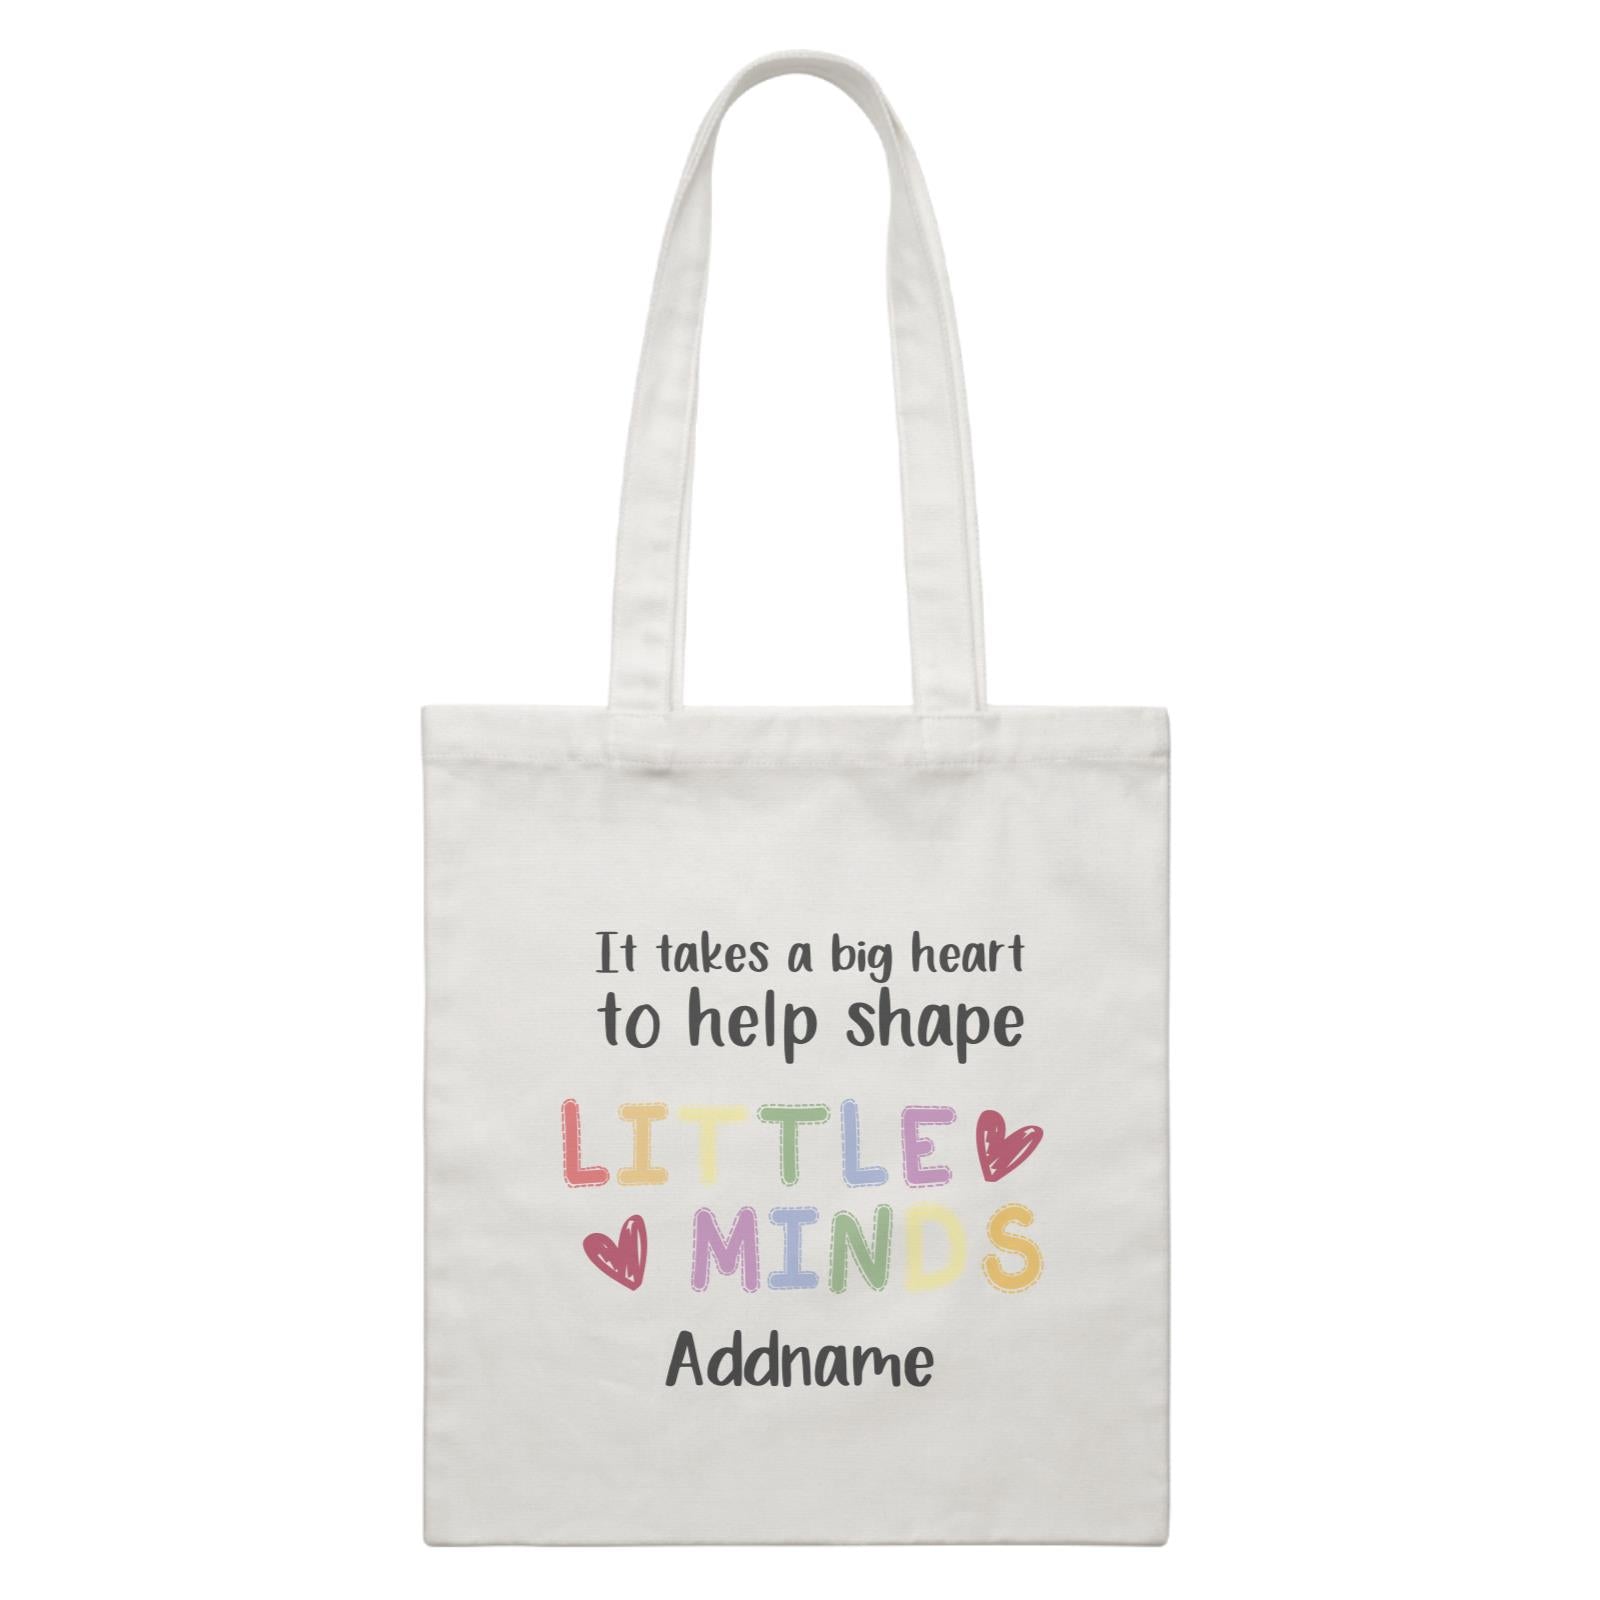 Teacher Quotes 2 It Takes A Big Heart To Help Shape Little Minds Addname White Canvas Bag